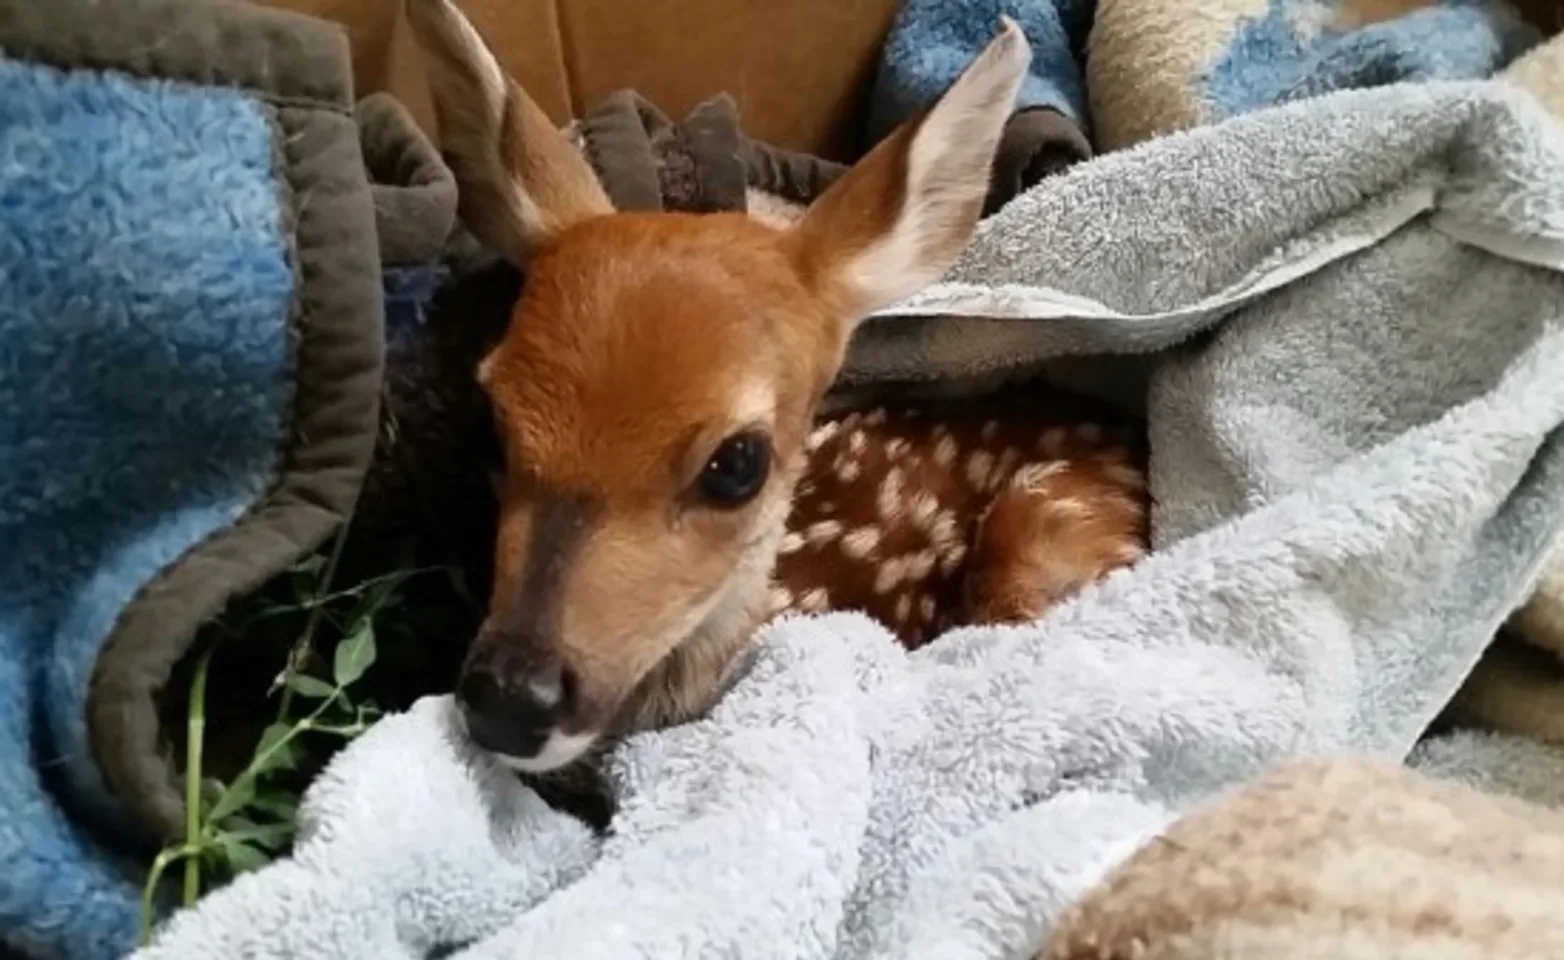 Deer fawn laying in a blanket